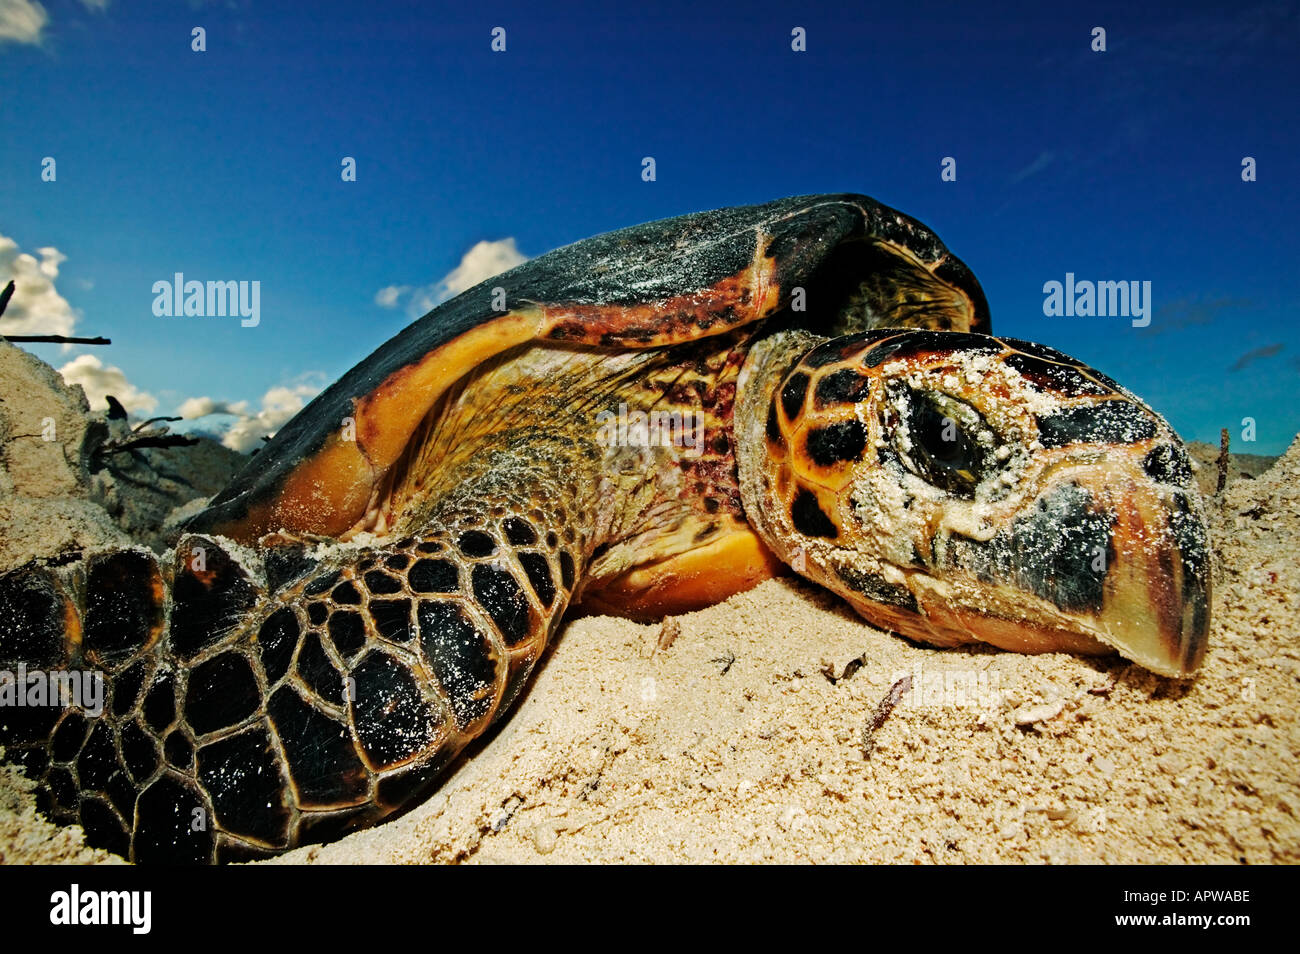 Hawksbill turtle Eretmochelys imbricata Endangered Laying eggs on beach Dist Tropical and subtropical oceans worldwide Stock Photo